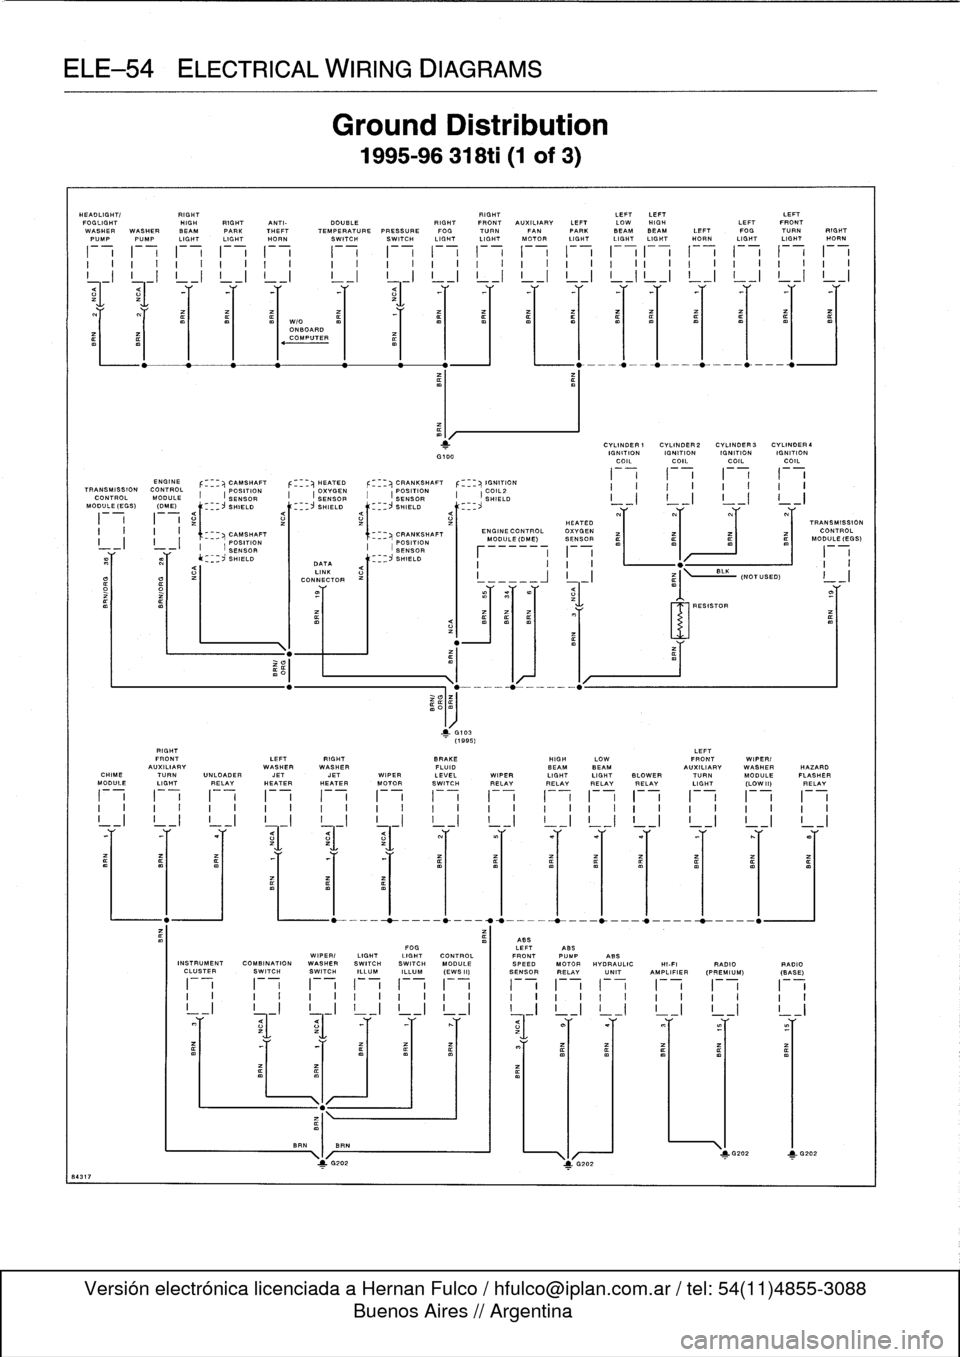 BMW 328i 1994 E36 Owners Guide 
ELE-54
ELECTRICAL
WIRING
DIAGRAMS

HEADLIGHT/

	

RIGHT

	

RIGHT

	

LEFTLEFT

	

LEFT
FOGLIGHT

	

HIGH
RIGHT
ANTI-

	

DOUBLE

	

RIGHT
FRONT
AUXILIARY
LEFT
LOW
HIGH

	

LEFT
FRONT
WASHER
WASHER
B